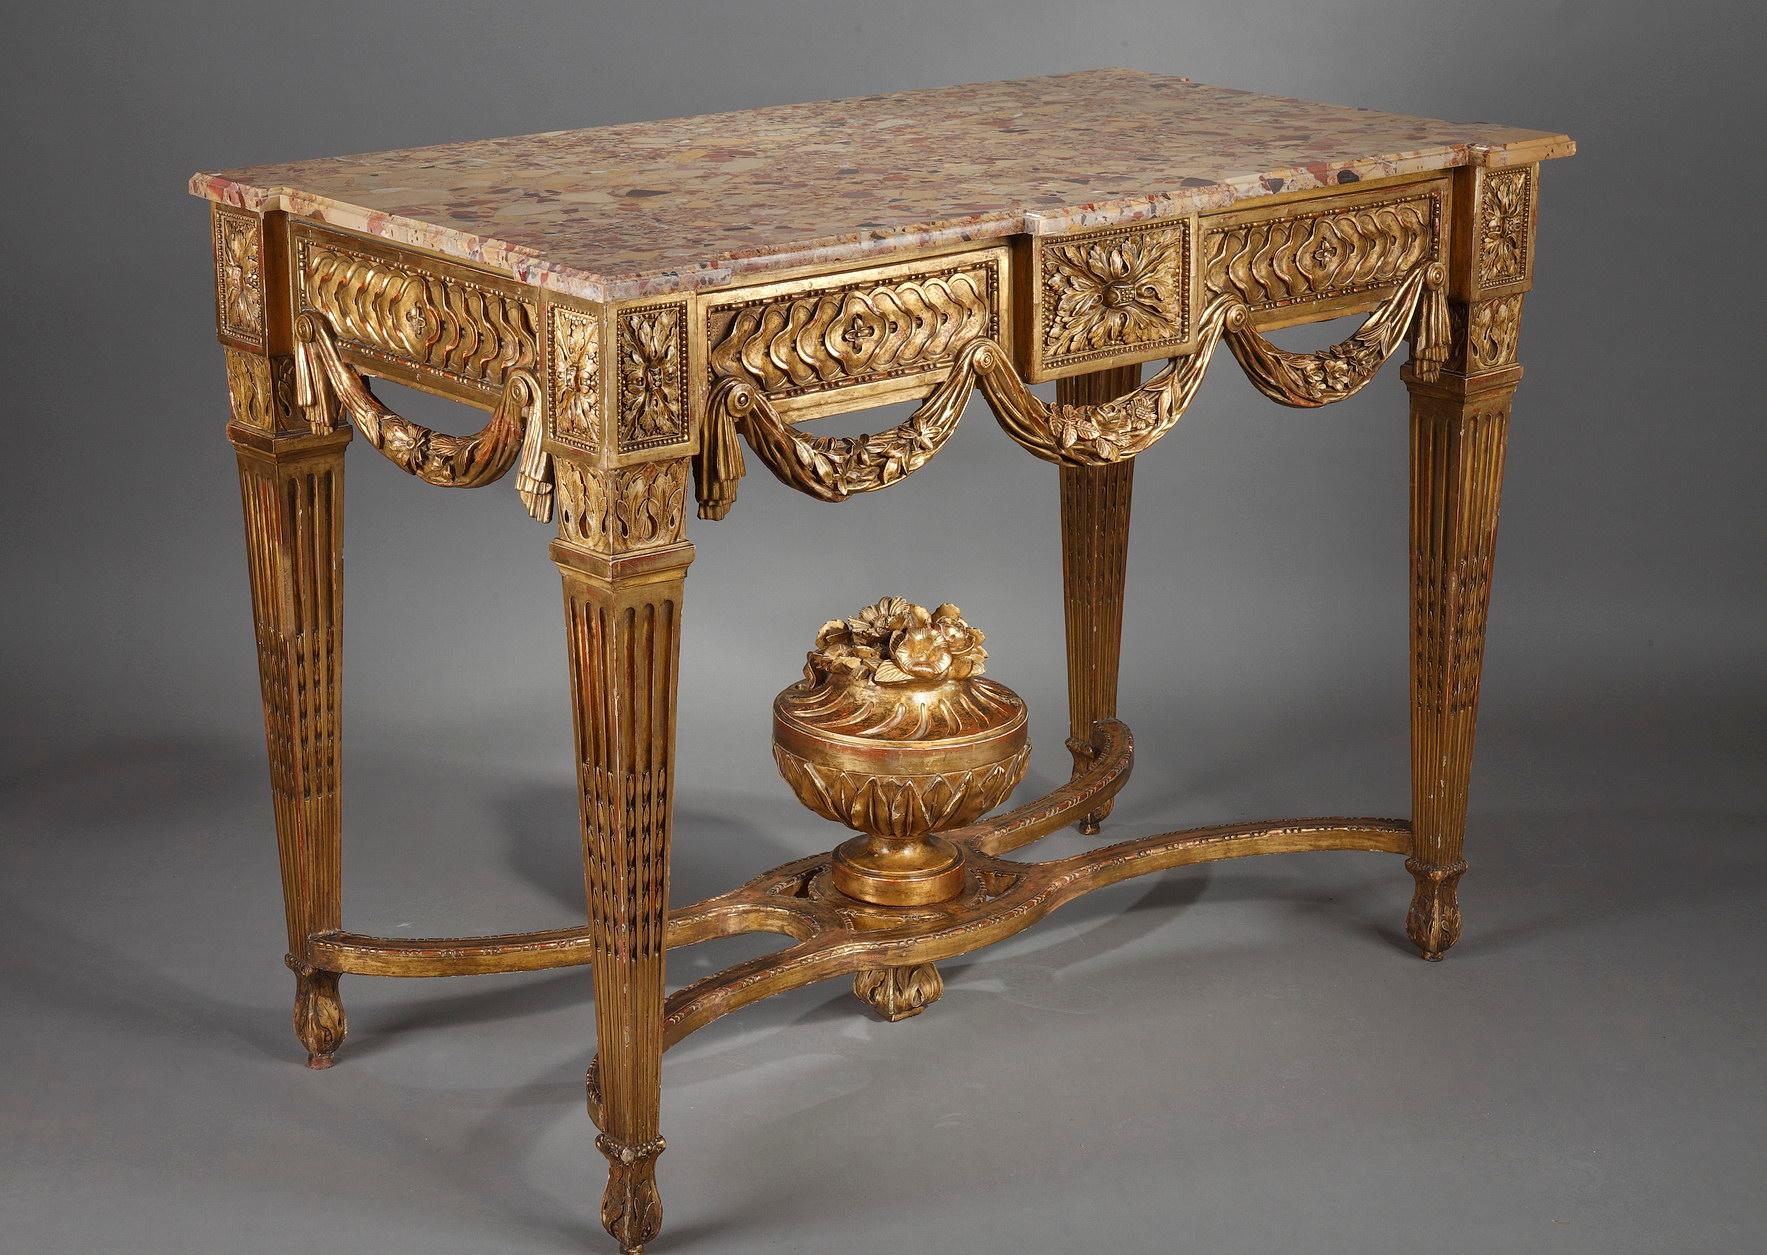 Beautiful console in the Louis XVI style in gilded and carved wood topped by a brocatelle marble top, resting on four fluted and filleted pilaster feet, joined by an X-shaped brace supporting a flowering vase in its center. The belt is decorated